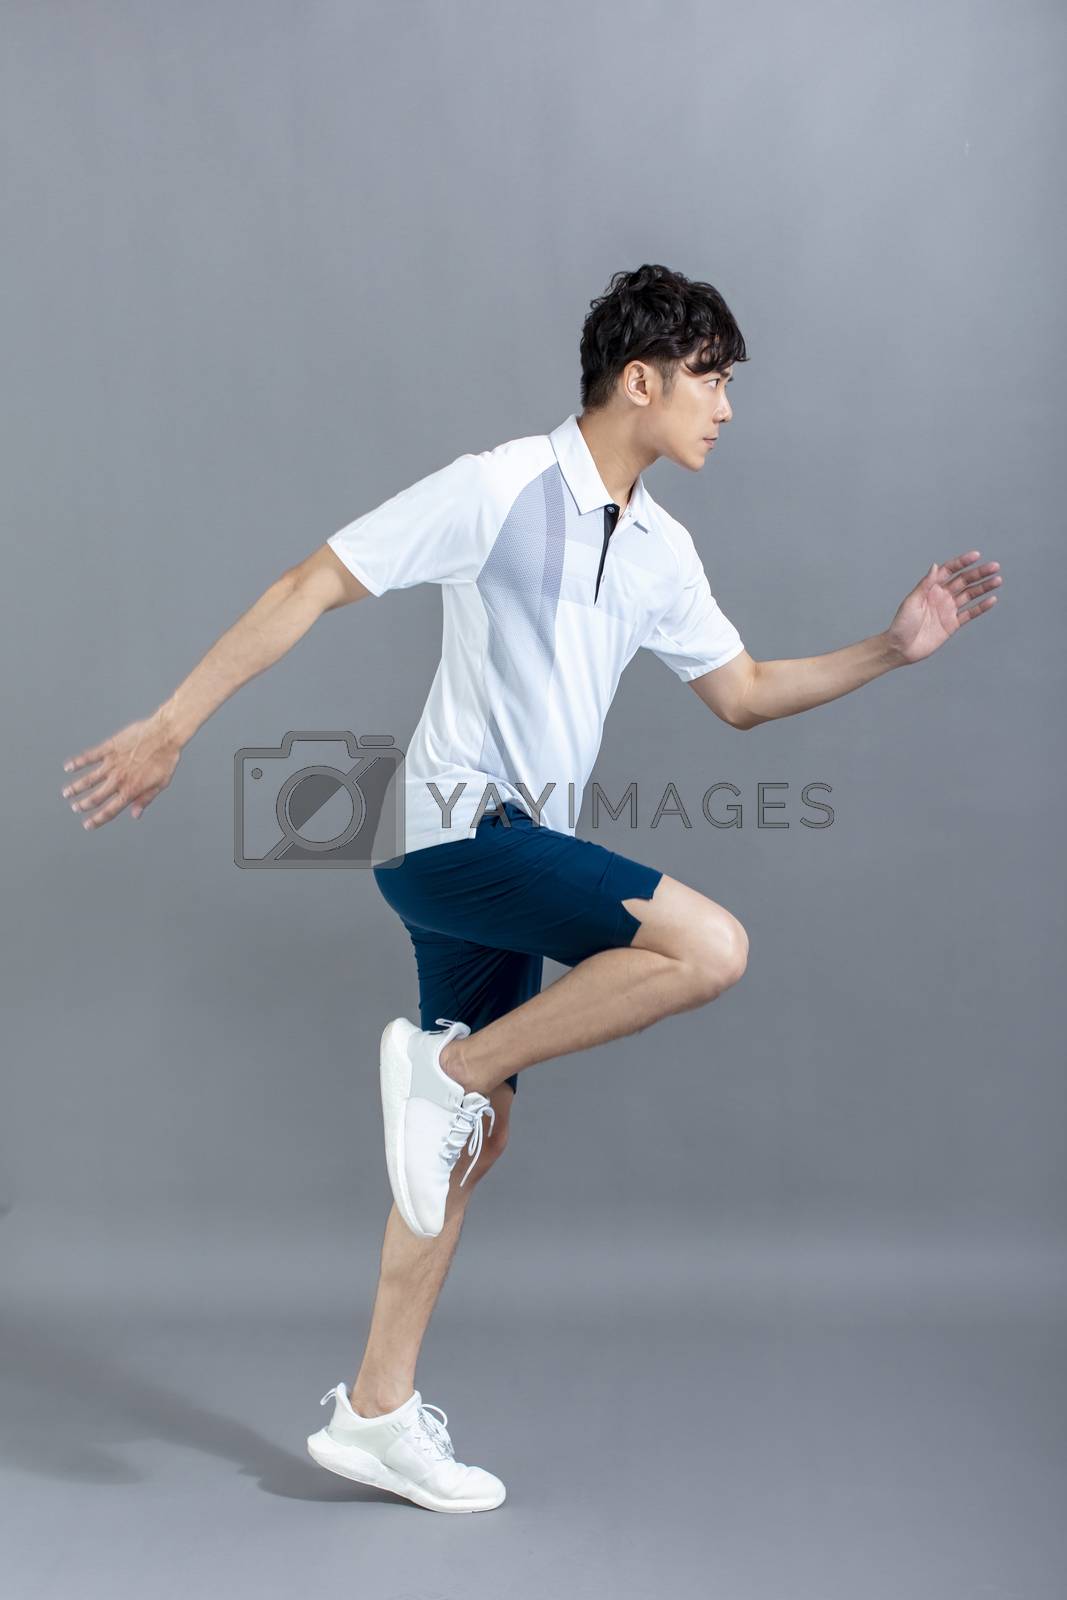 Royalty free image of  portrait of  fitness young man running on the gray background by tomwang